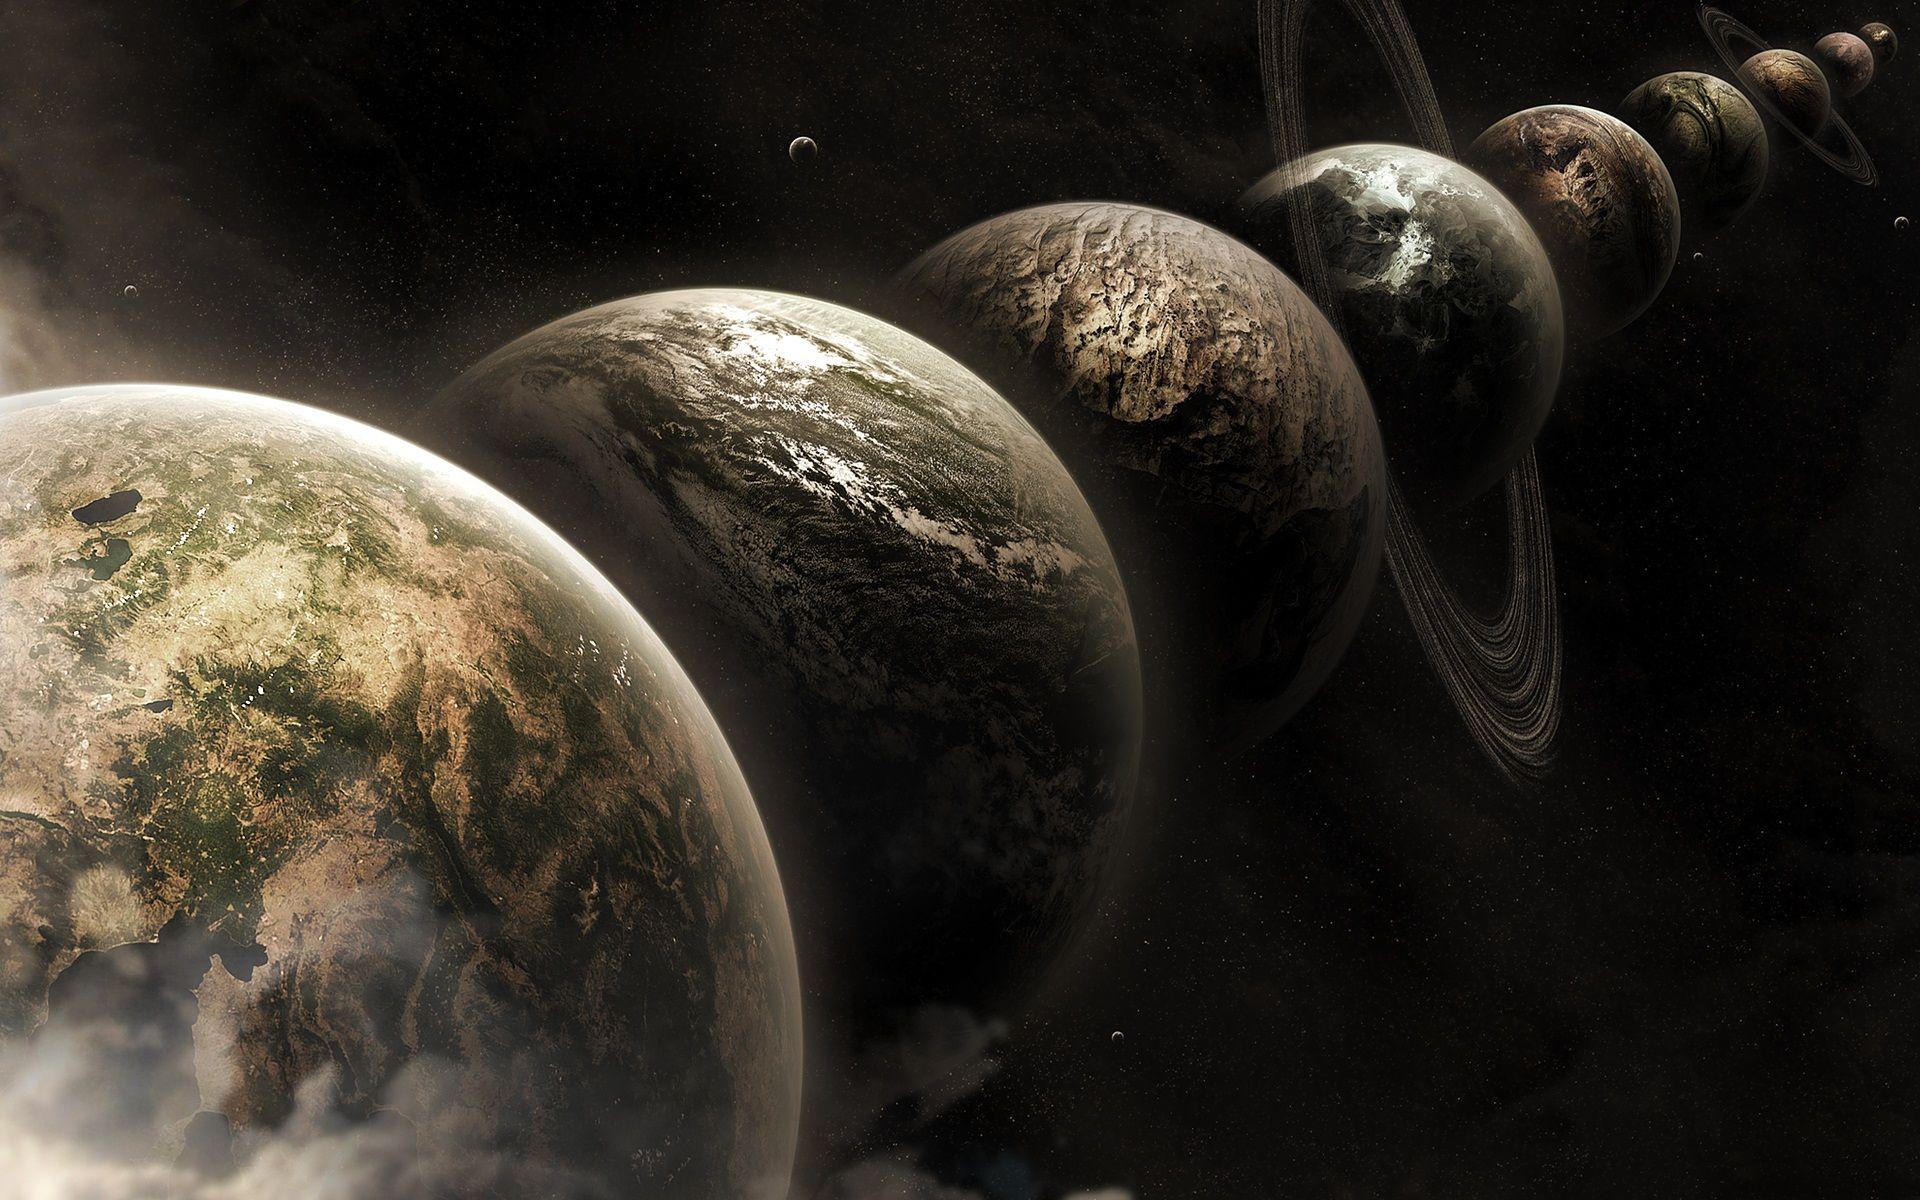 awesome wallpapers hd multiverse